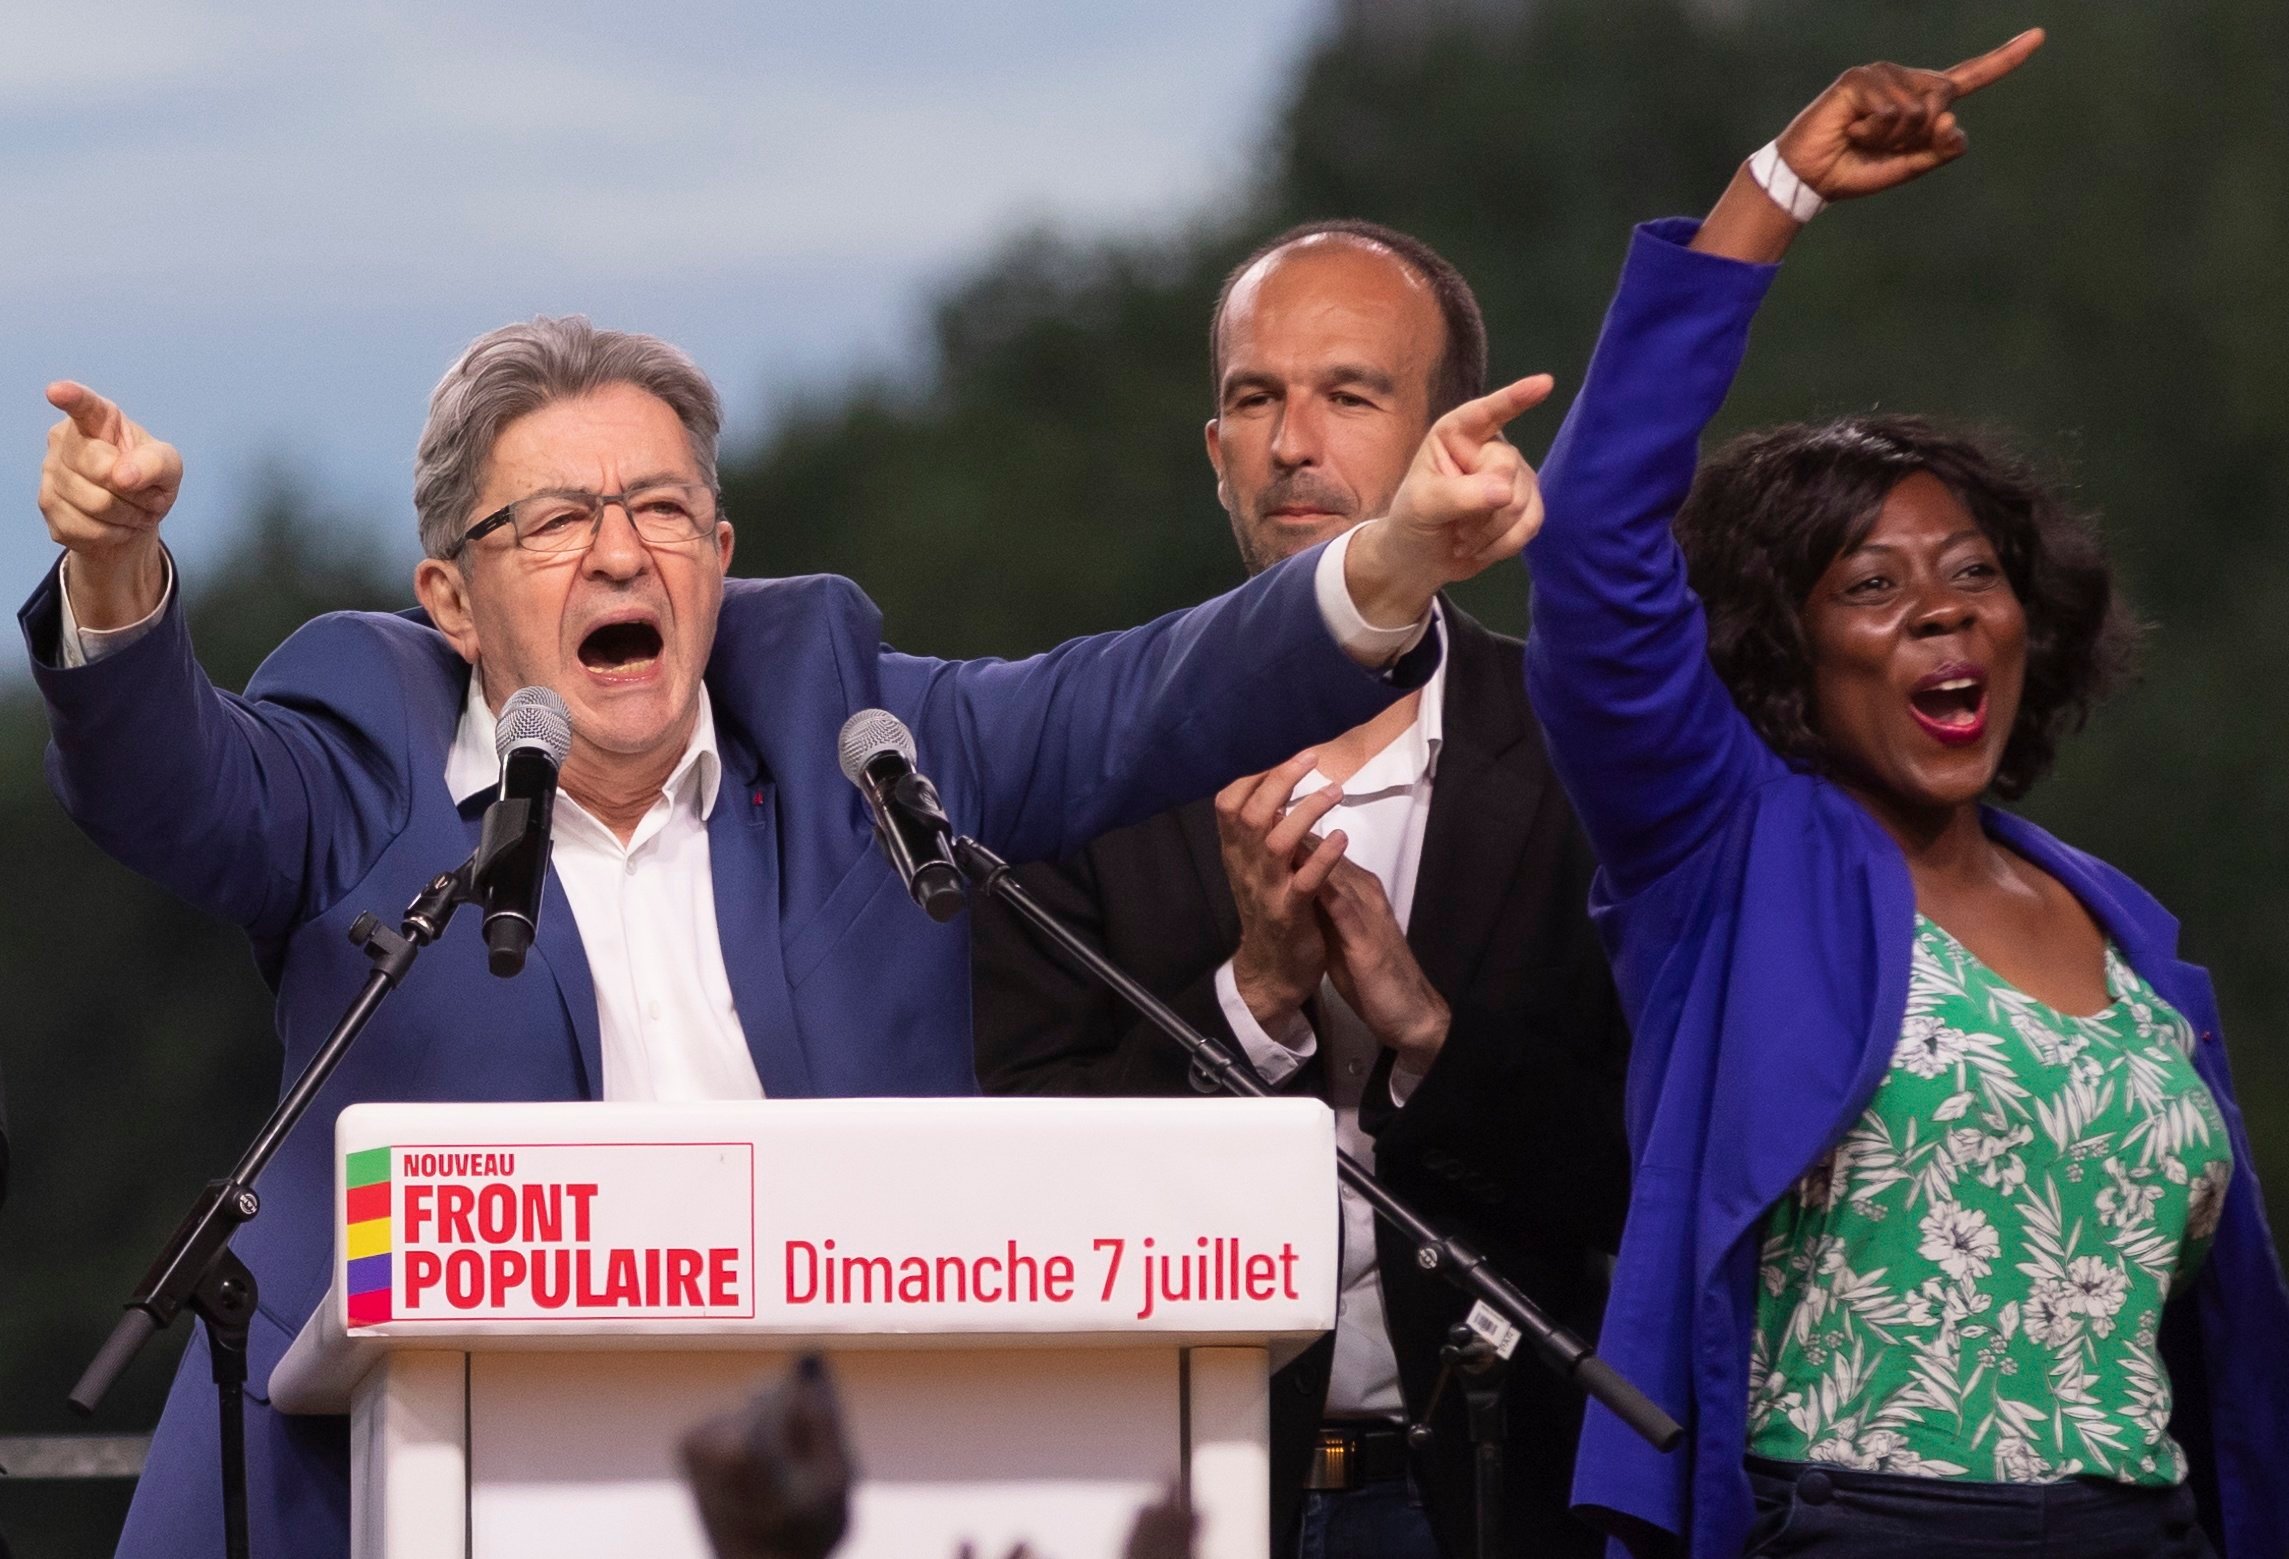 Jean-Luc Melenchon, the polarising firebrand of the hard-left France Unbowed (LFI) party, reacts to the surprising results of France’s election on July 7, which put his New Popular Front coalition in the lead. Photo: EPA-EFE